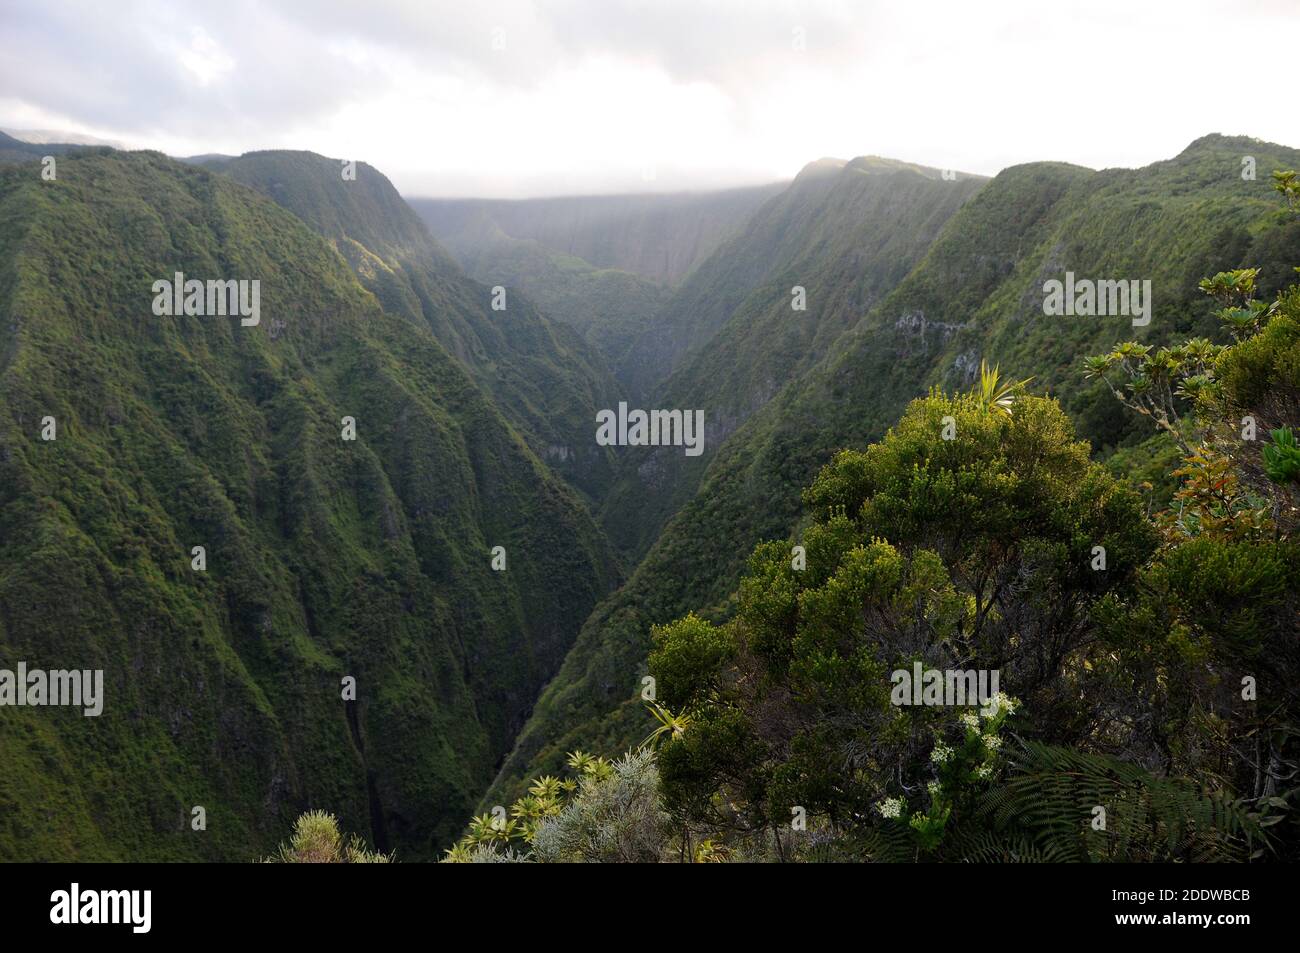 Views of Reunion island's craggy interior of gorges and untouched forest, seen from a hiking rail by the golf course in St Denis Stock Photo